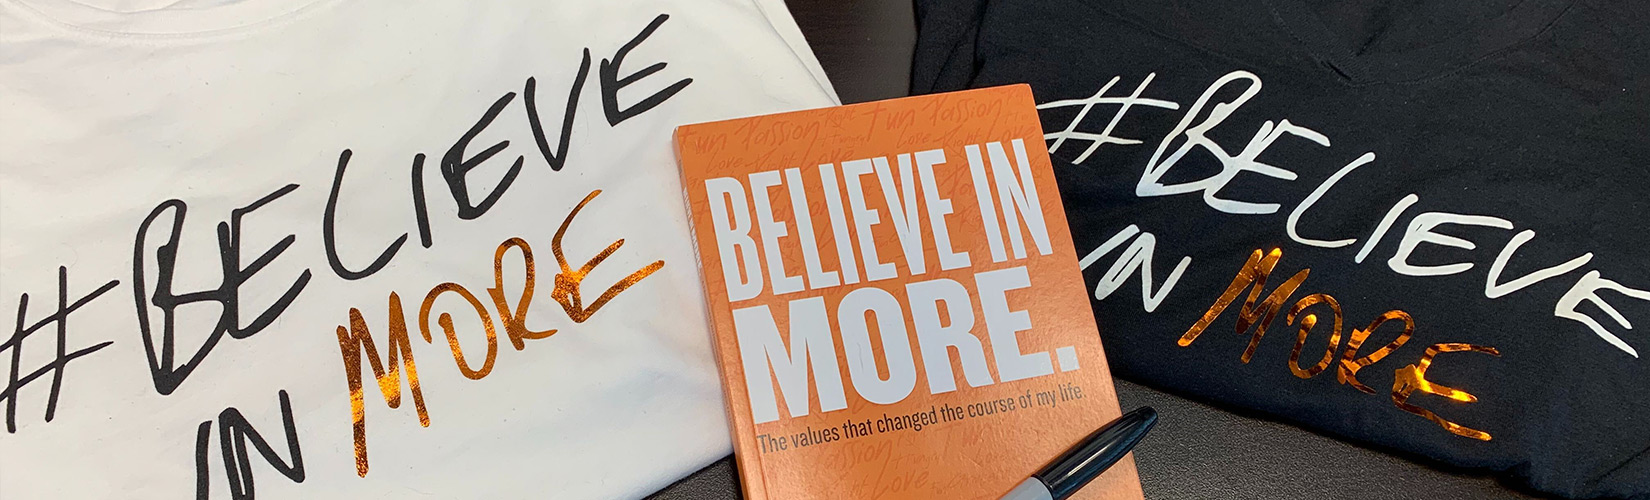 Welcome To Believe in More